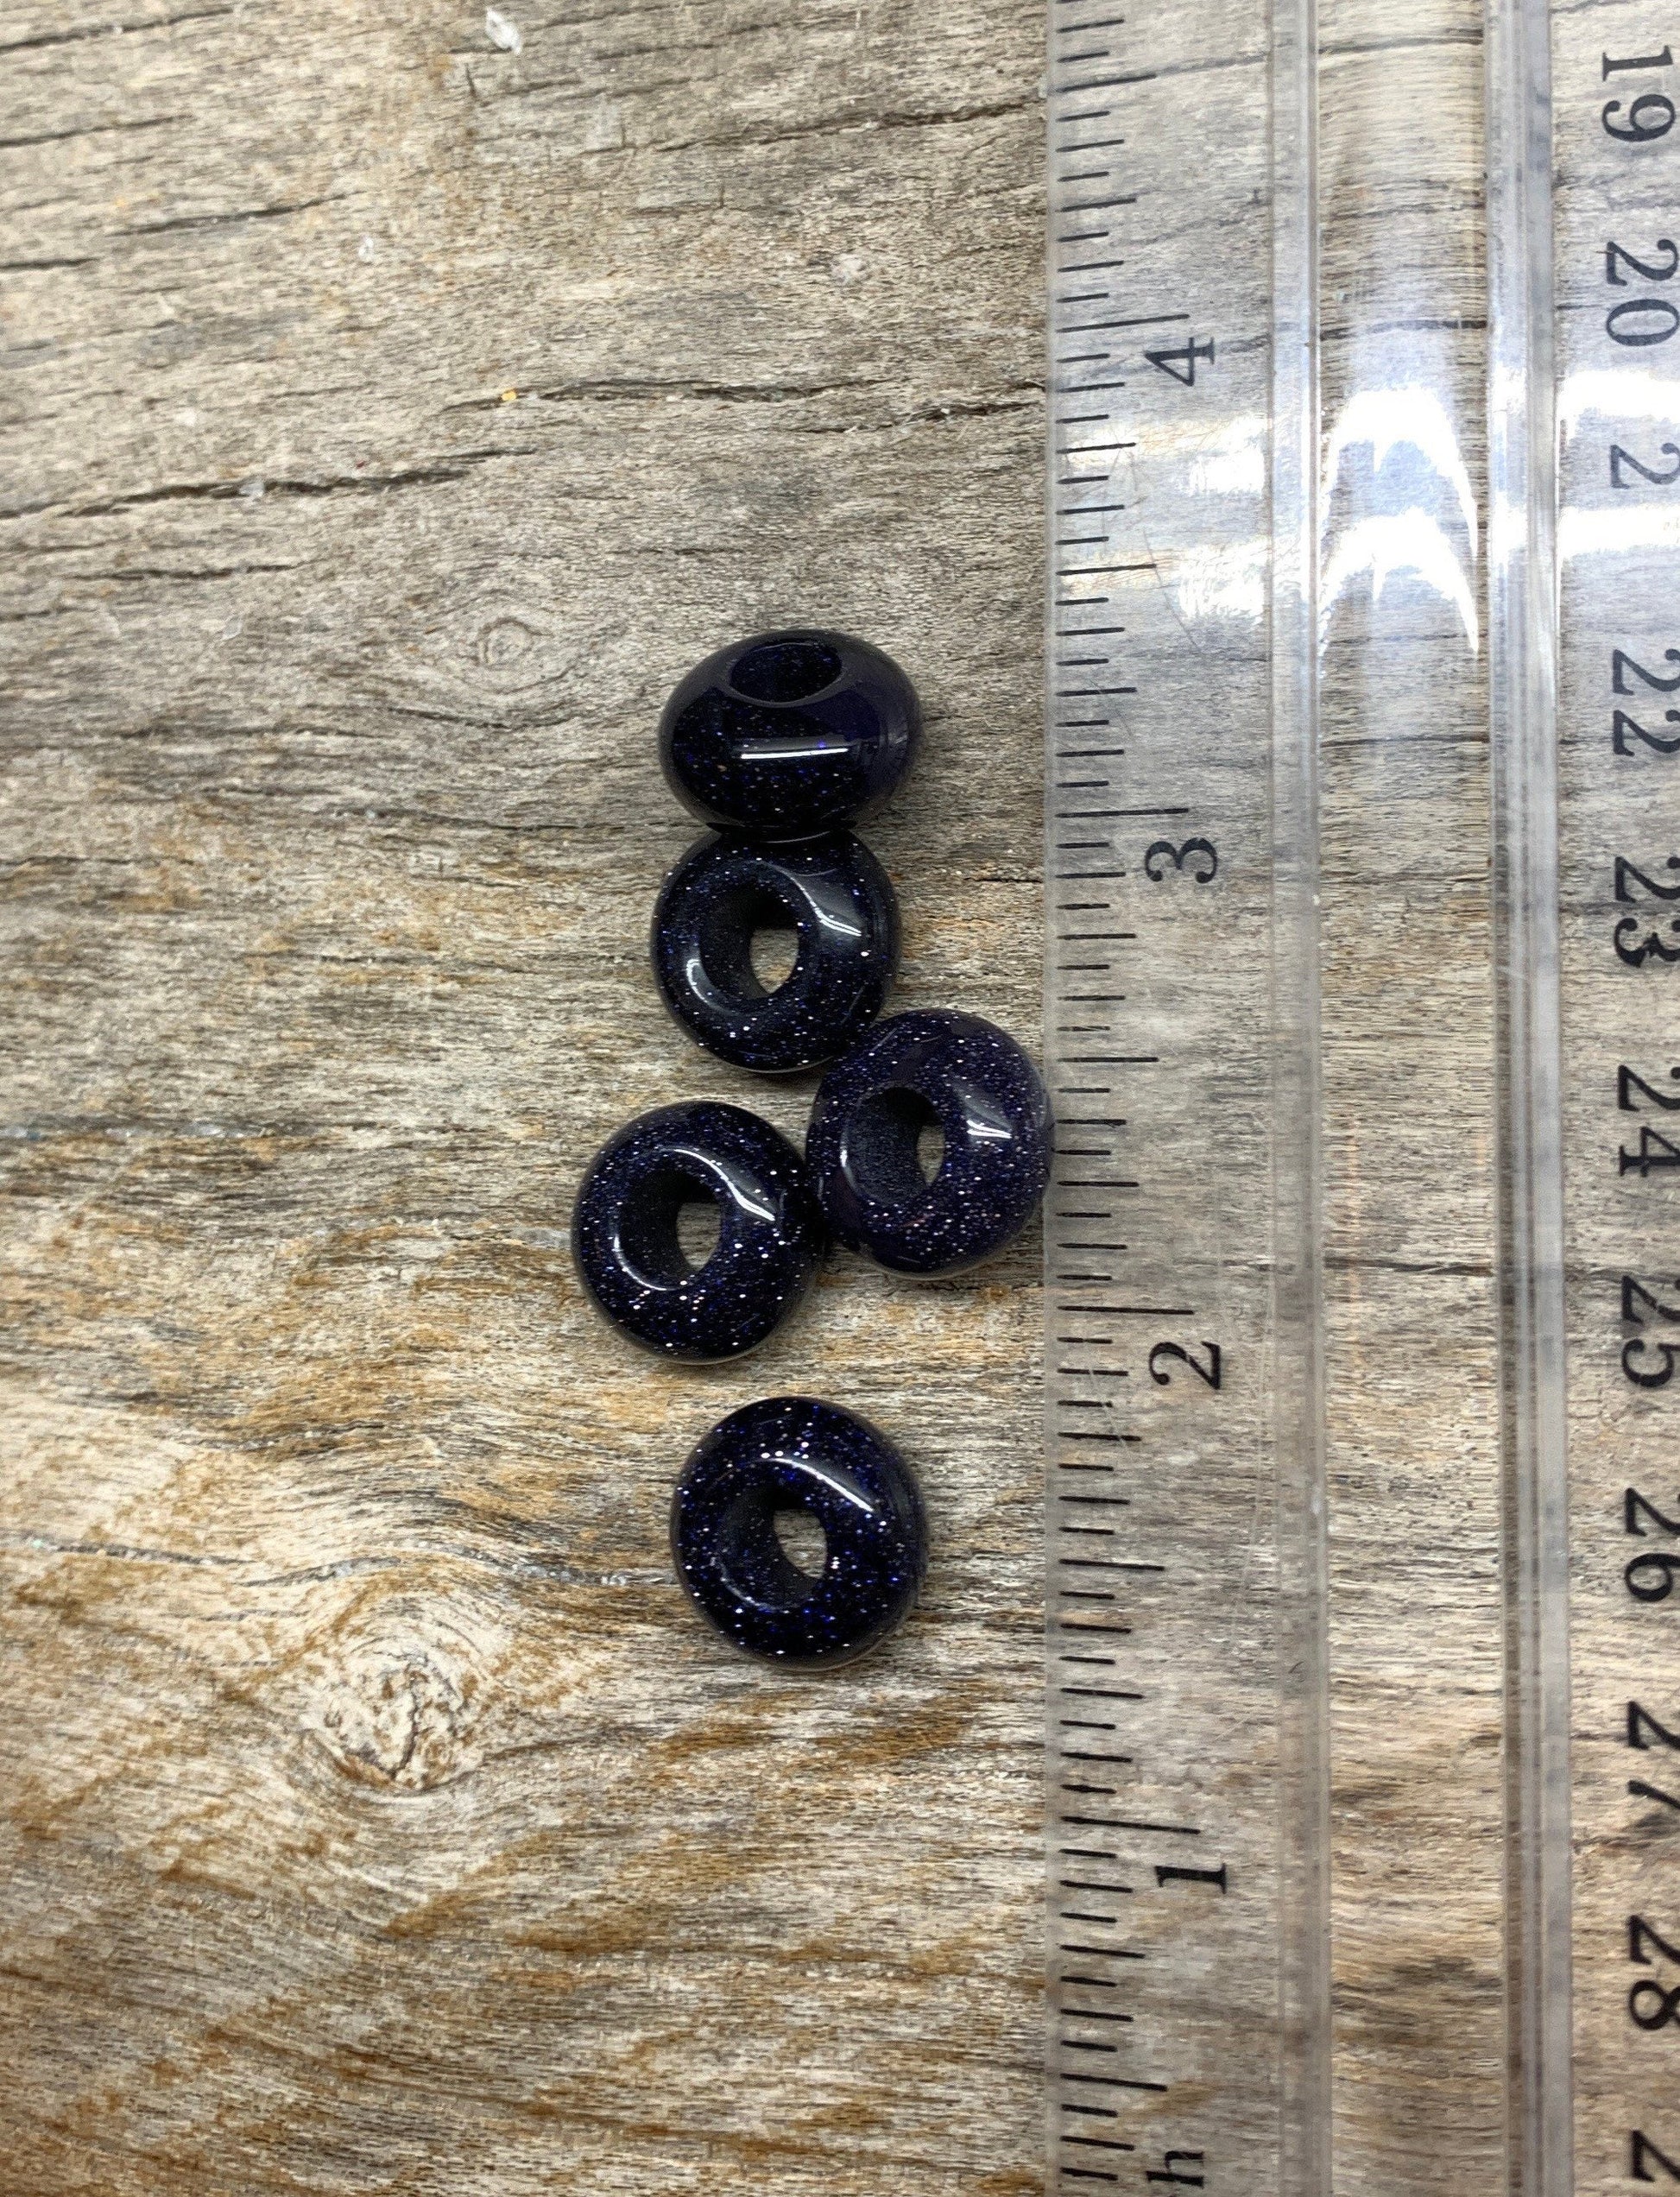 "Five blue goldstone beads, each measuring 5mm in diameter. The beads exhibit a deep blue color with sparkling metallic flecks, creating a captivating and shimmering appearance, positioned next to a ruler